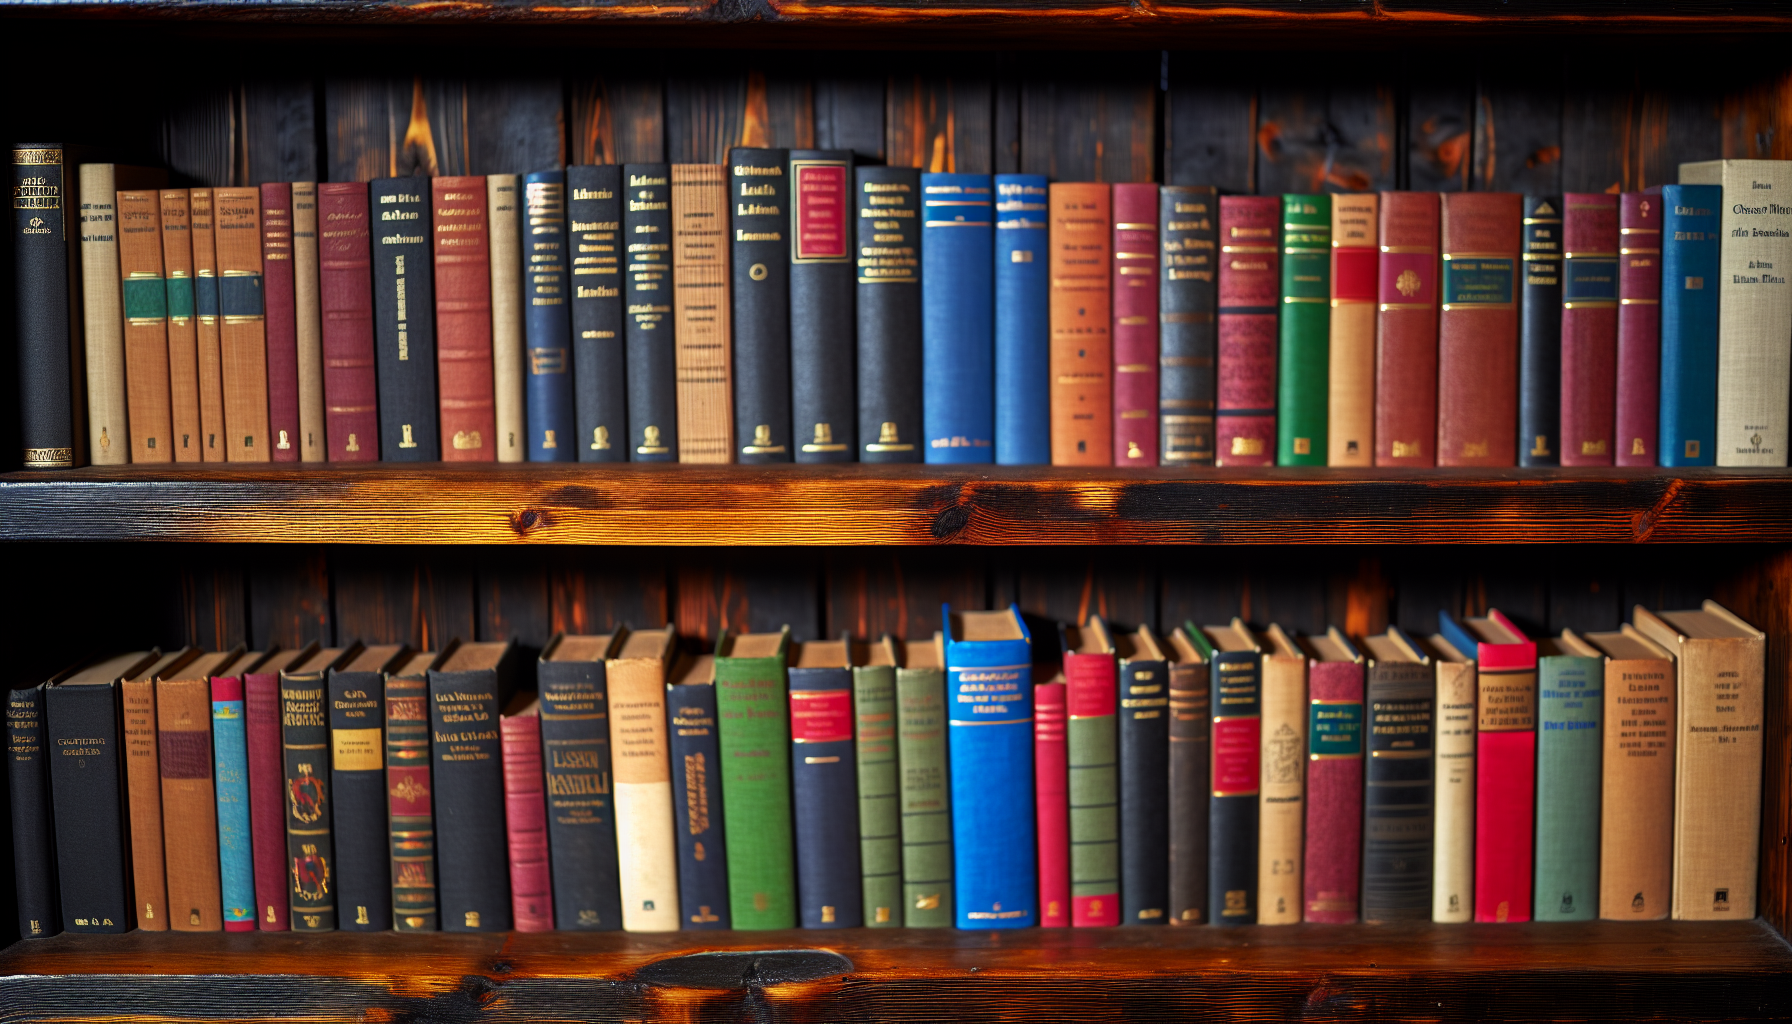 A collection of classic books displayed on a wooden shelf